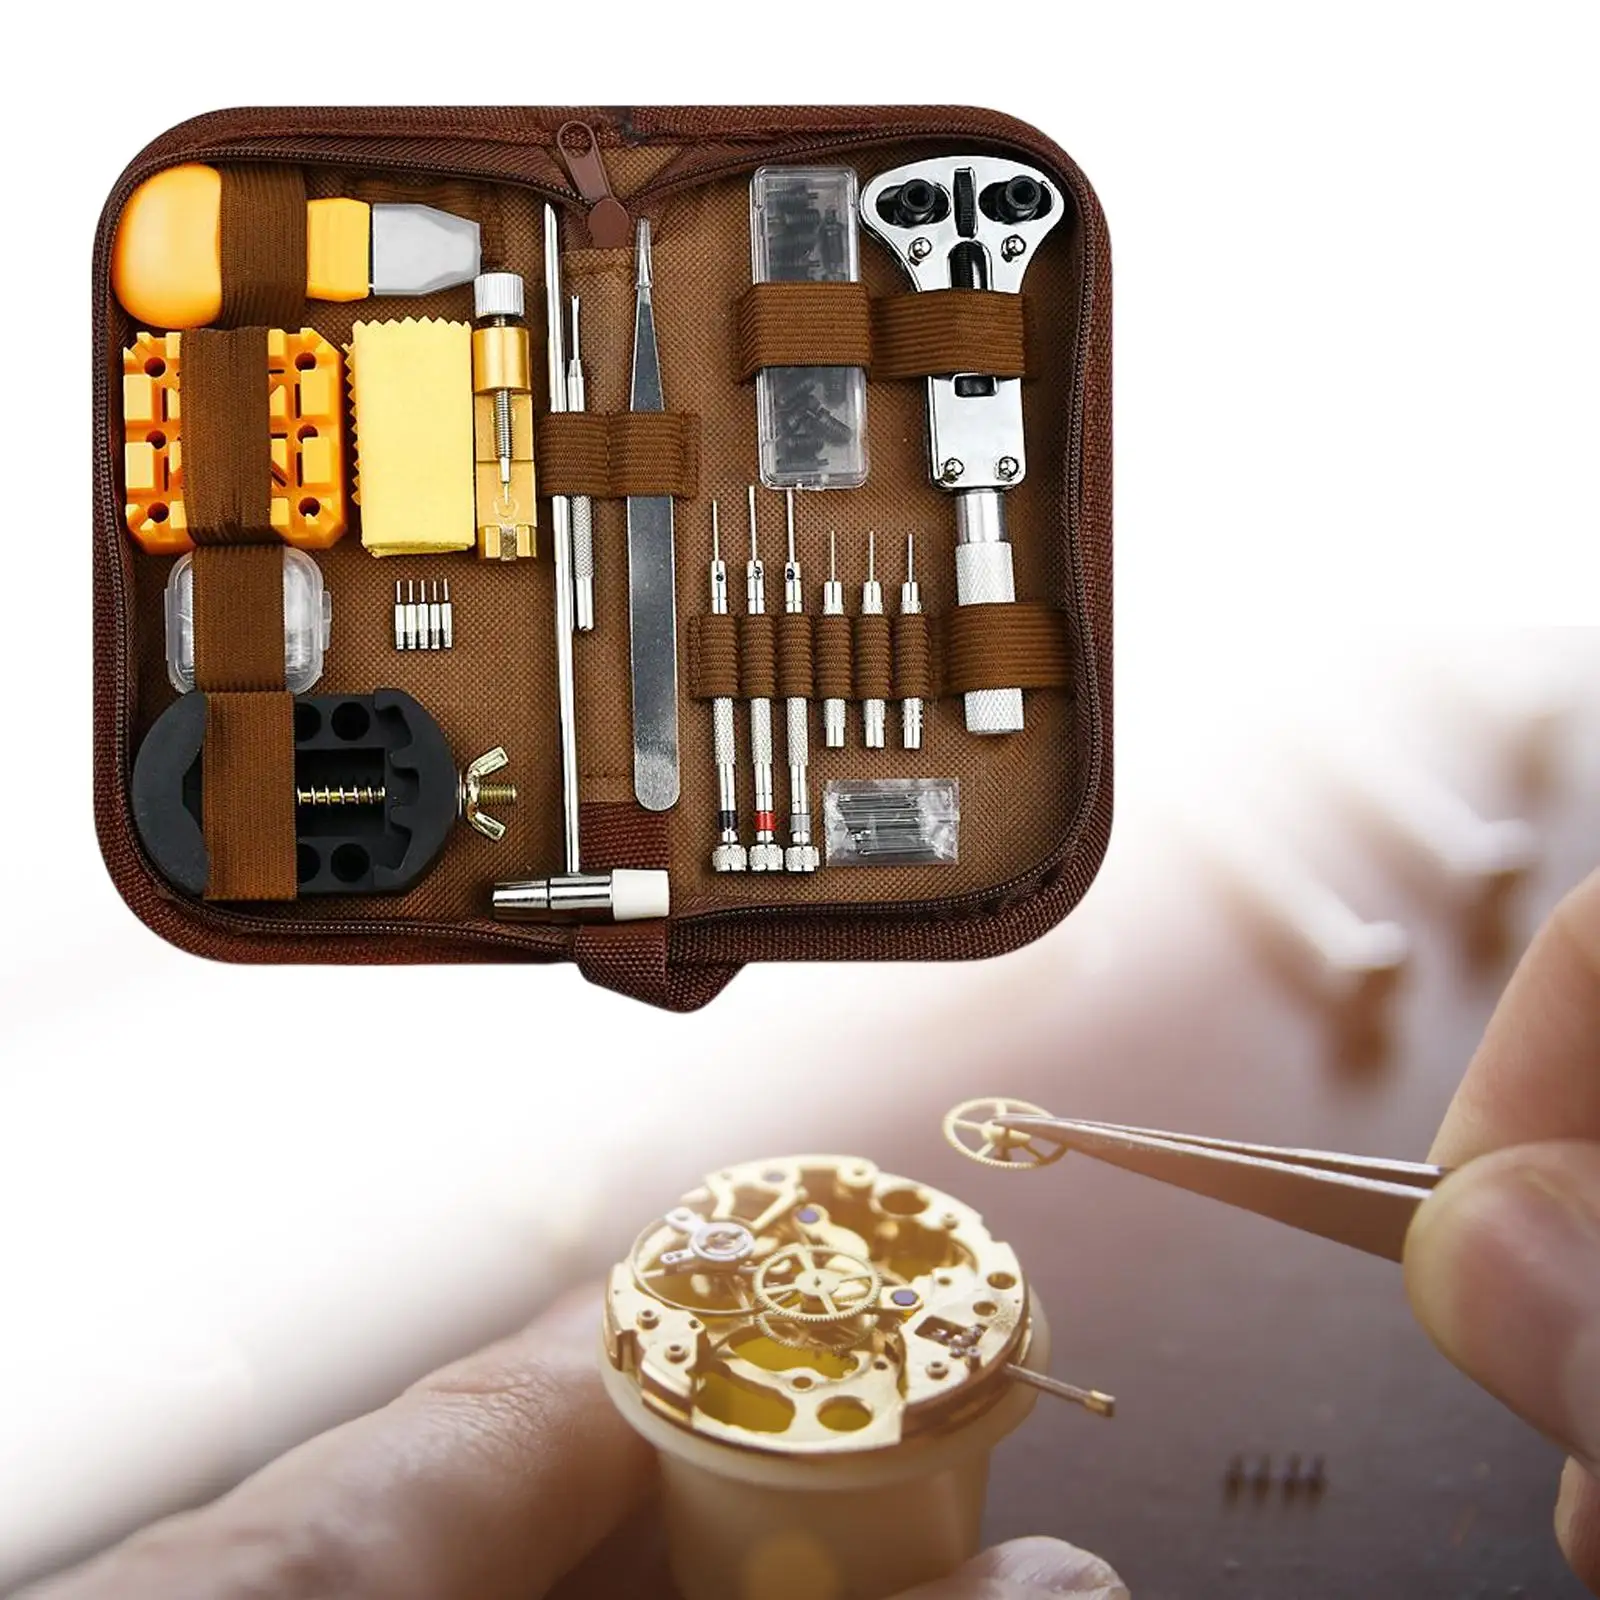 168Pcs Watch Repair Kit Opener Accessories Storage Case Adjustment Extra Pins Professional Screwdriver Watch Battery Replacement